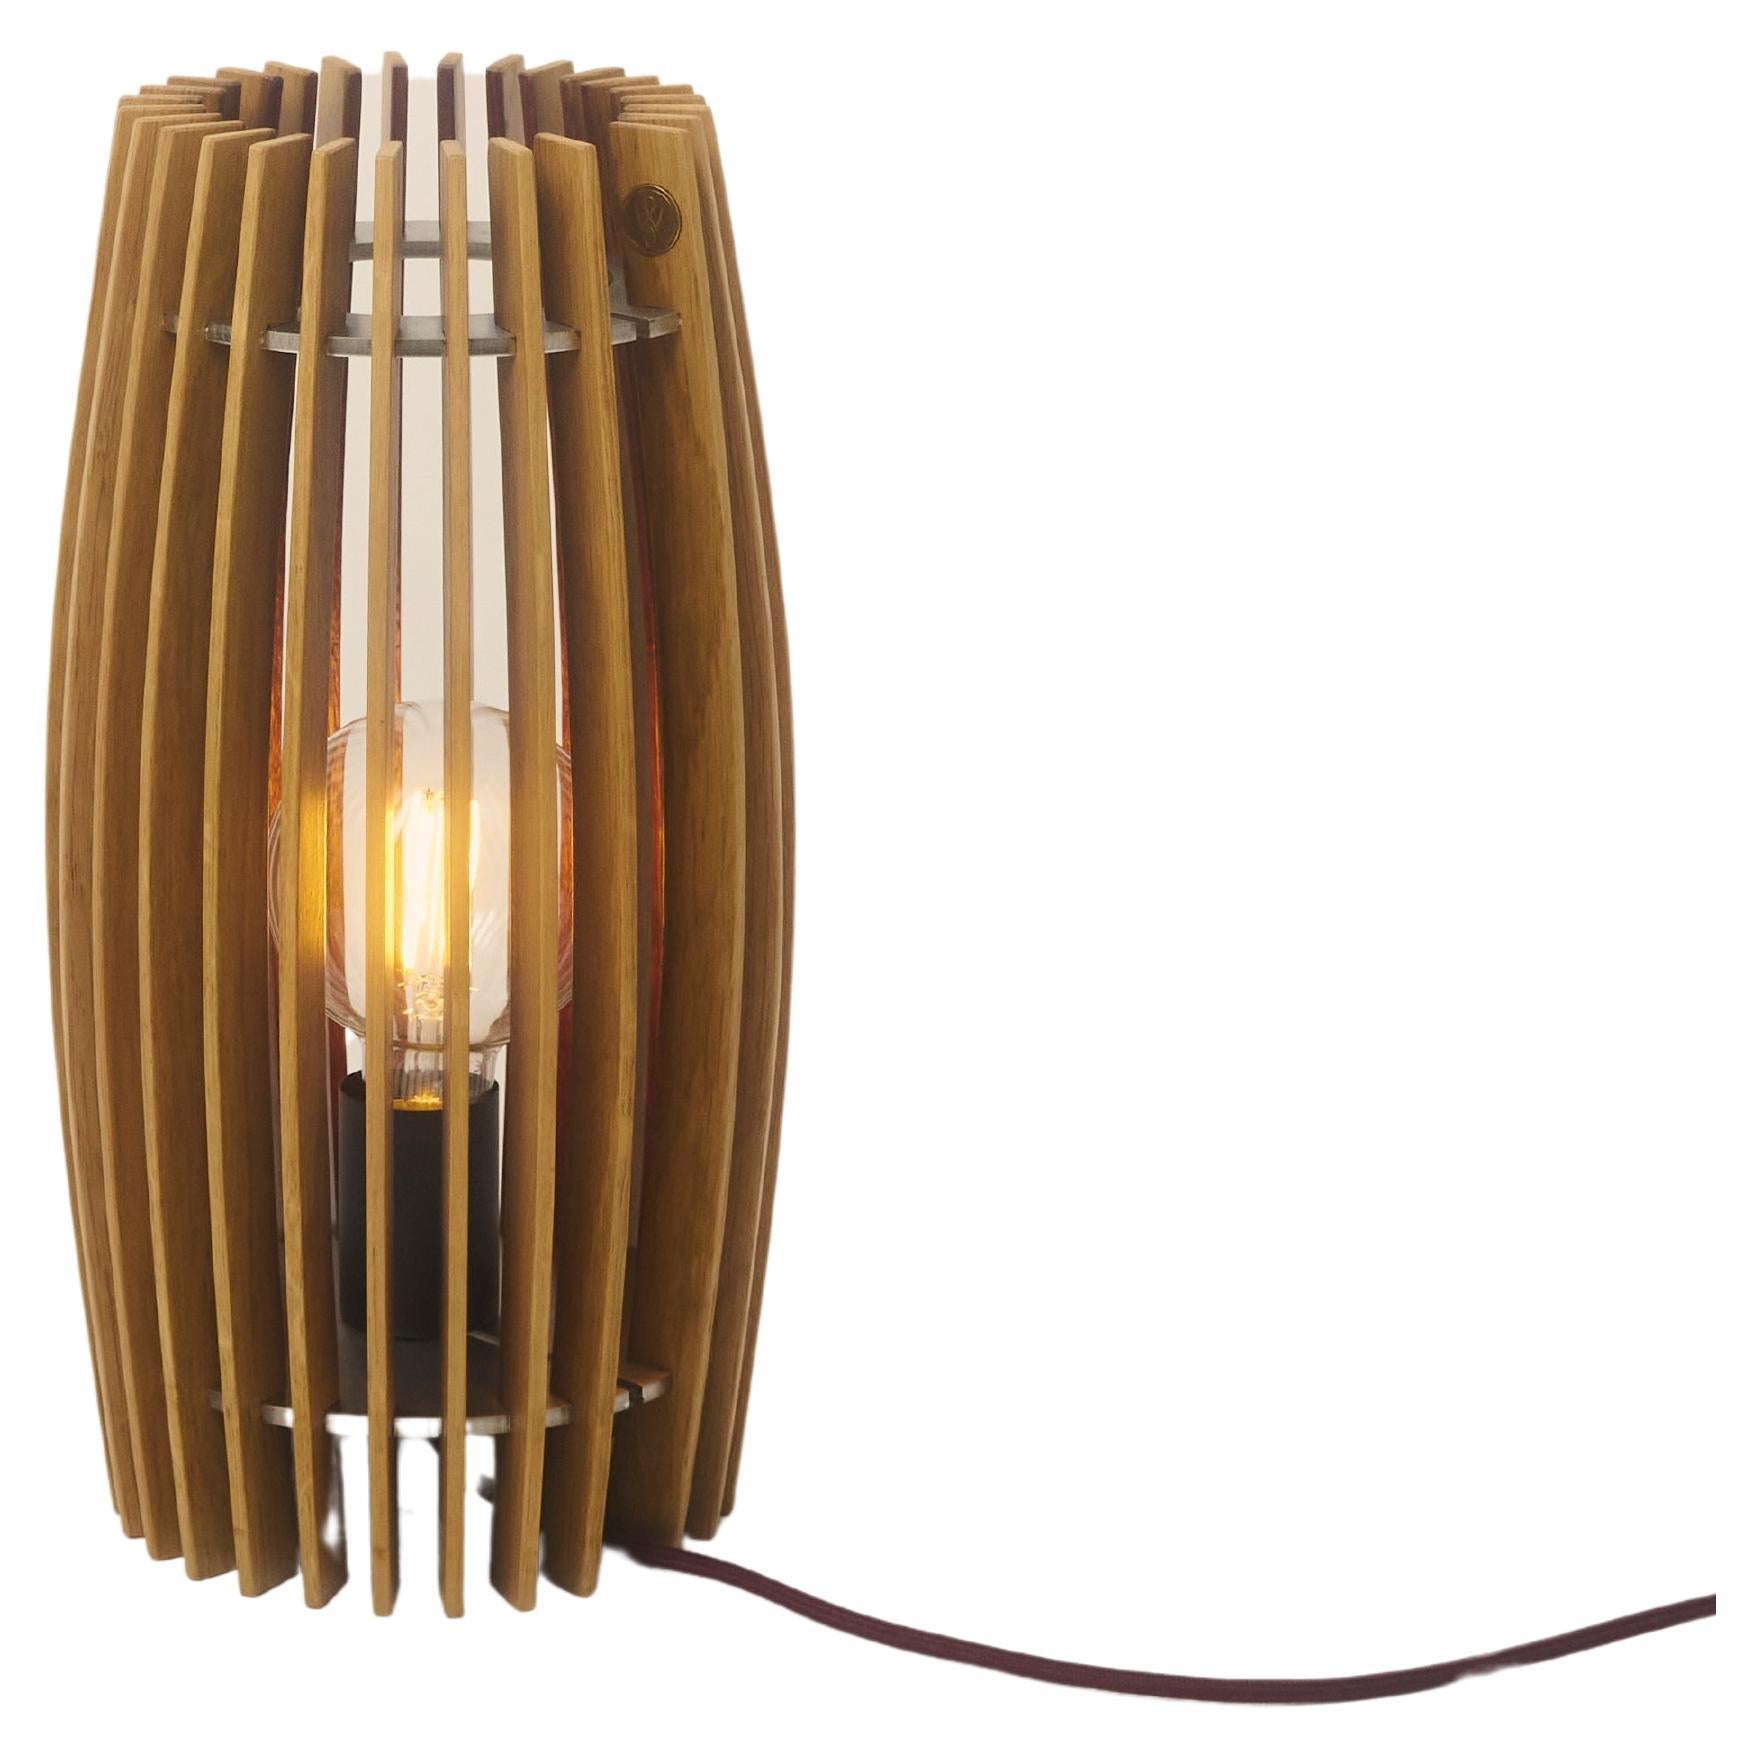 Flussio table lamp by Winetage handmade in Italy